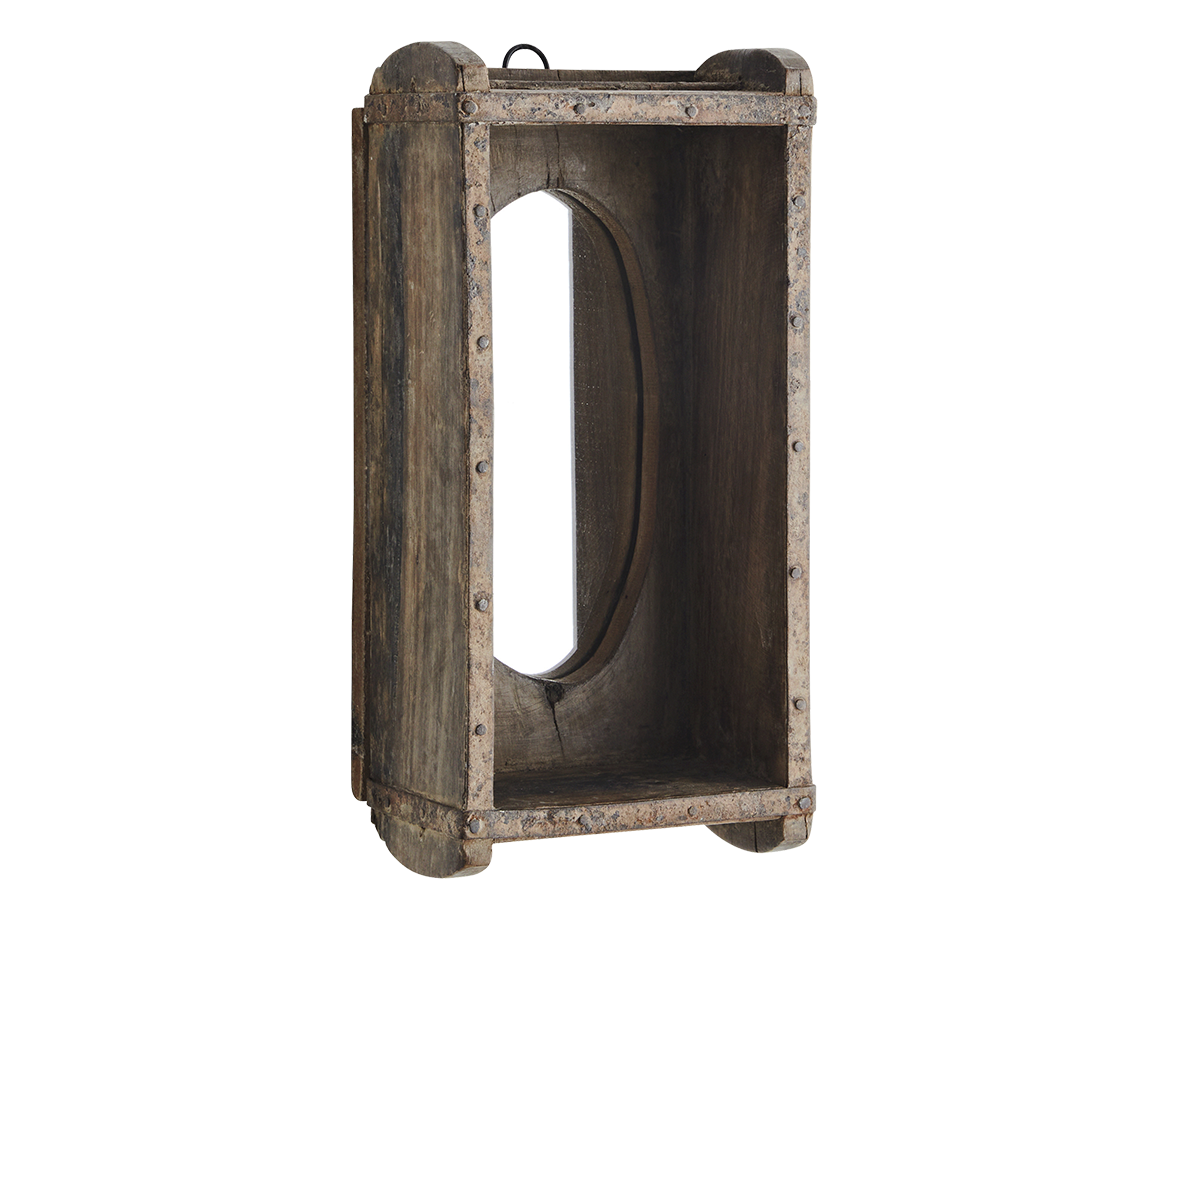 Upcycled brick mould w/ mirror